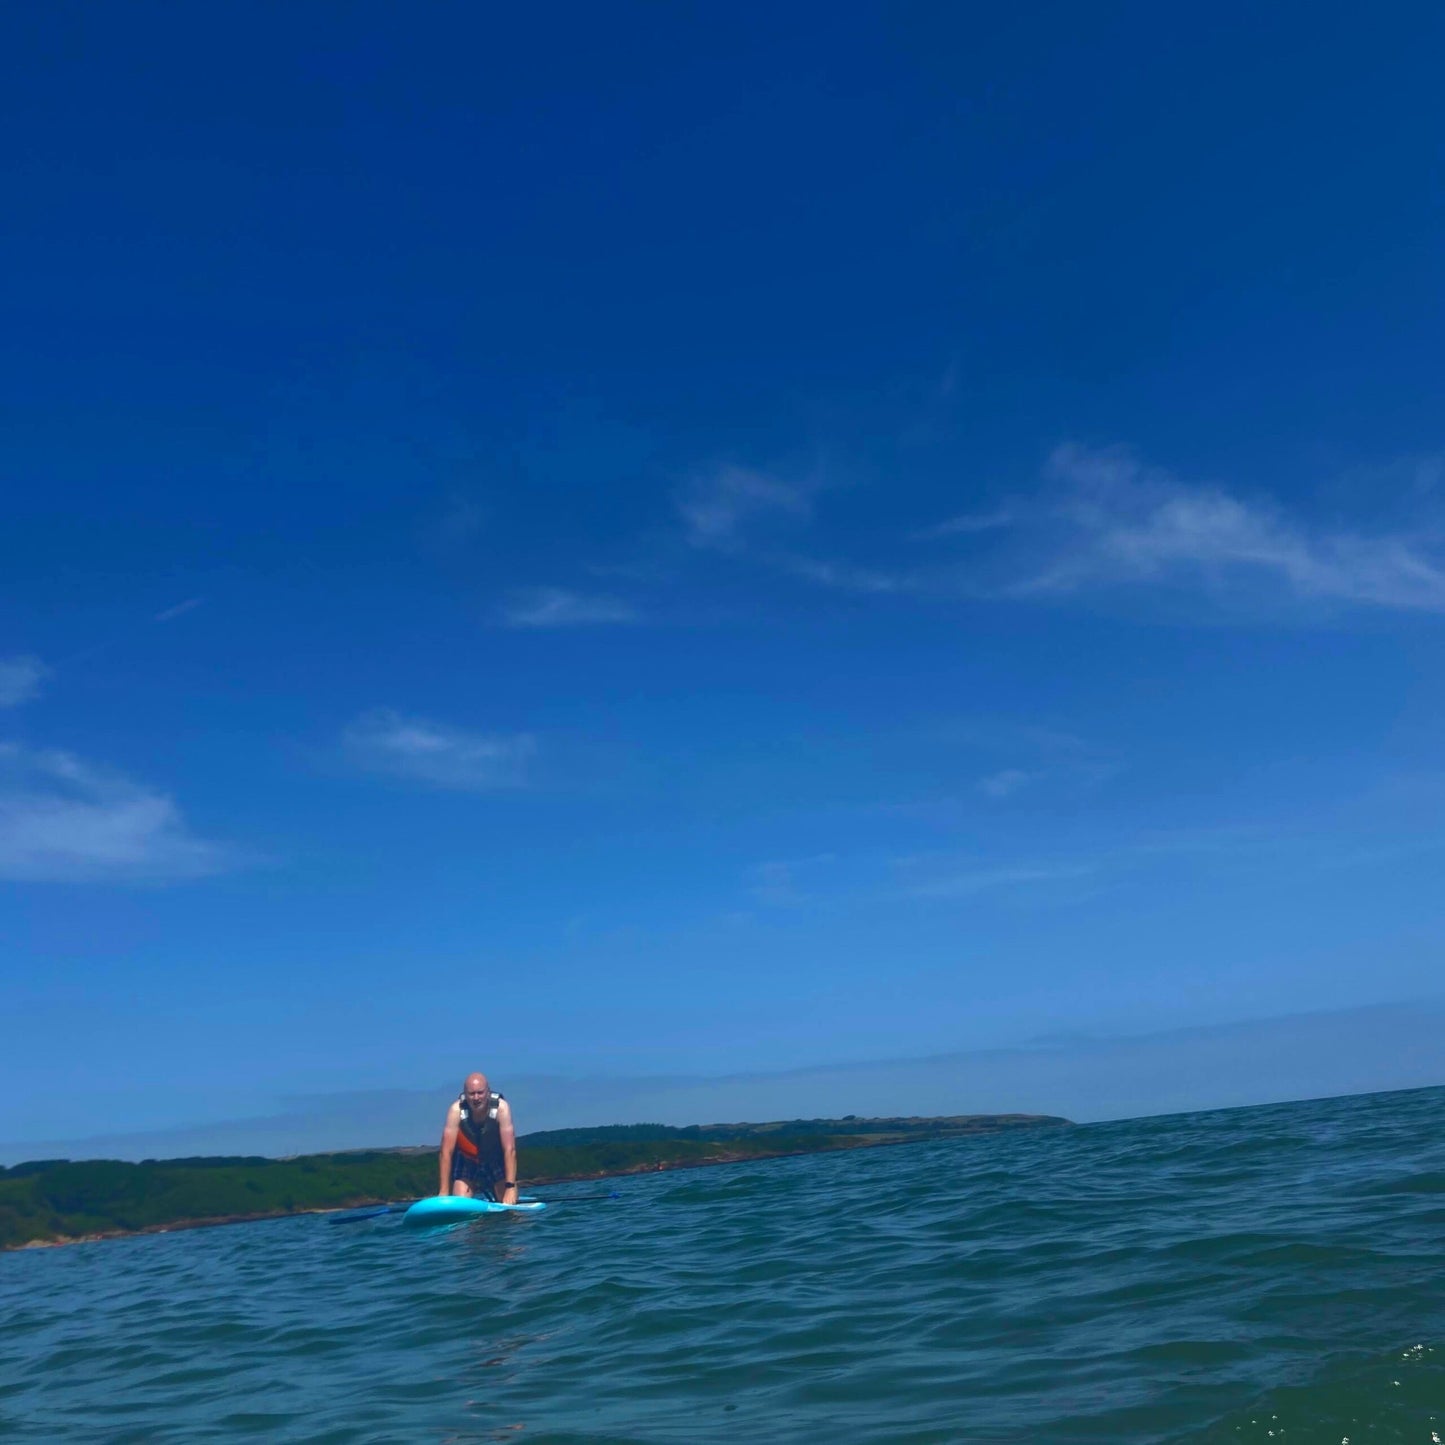 Paddle Boarding at Lligwy Beach - Bluefaced Leicester Sock